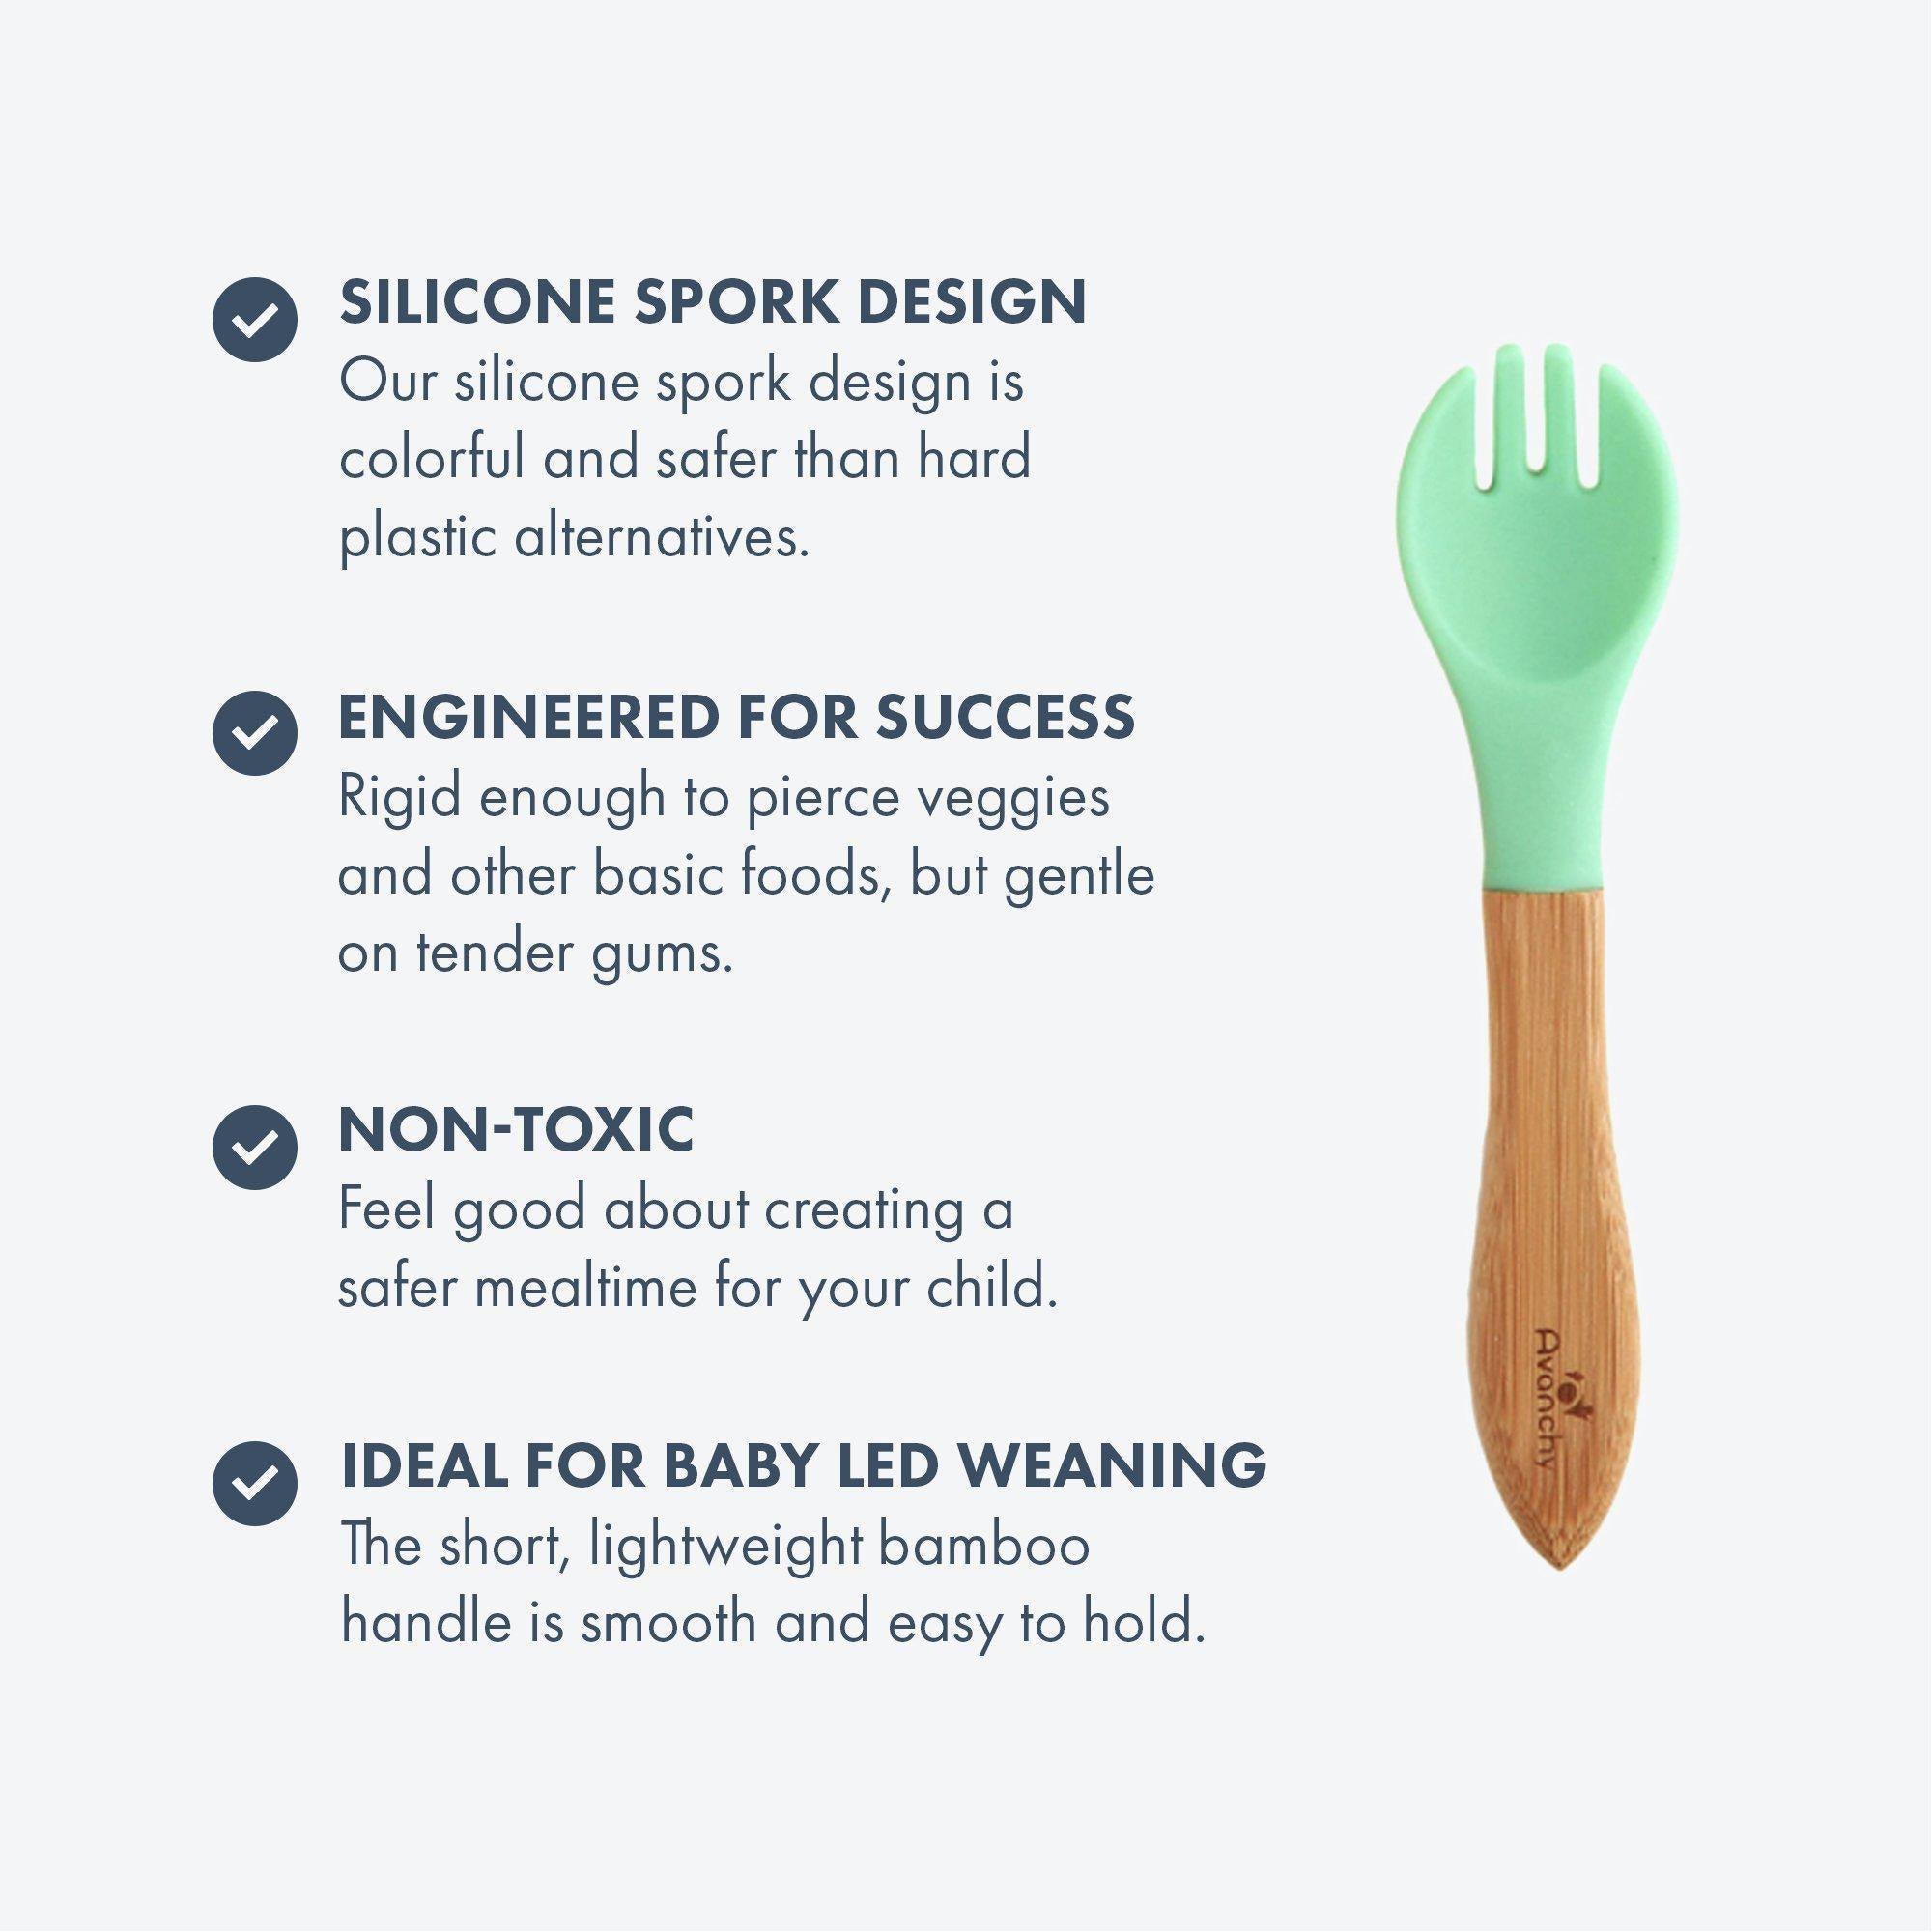 Single Bamboo Baby Fork - Avanchy Sustainable Baby Dishware